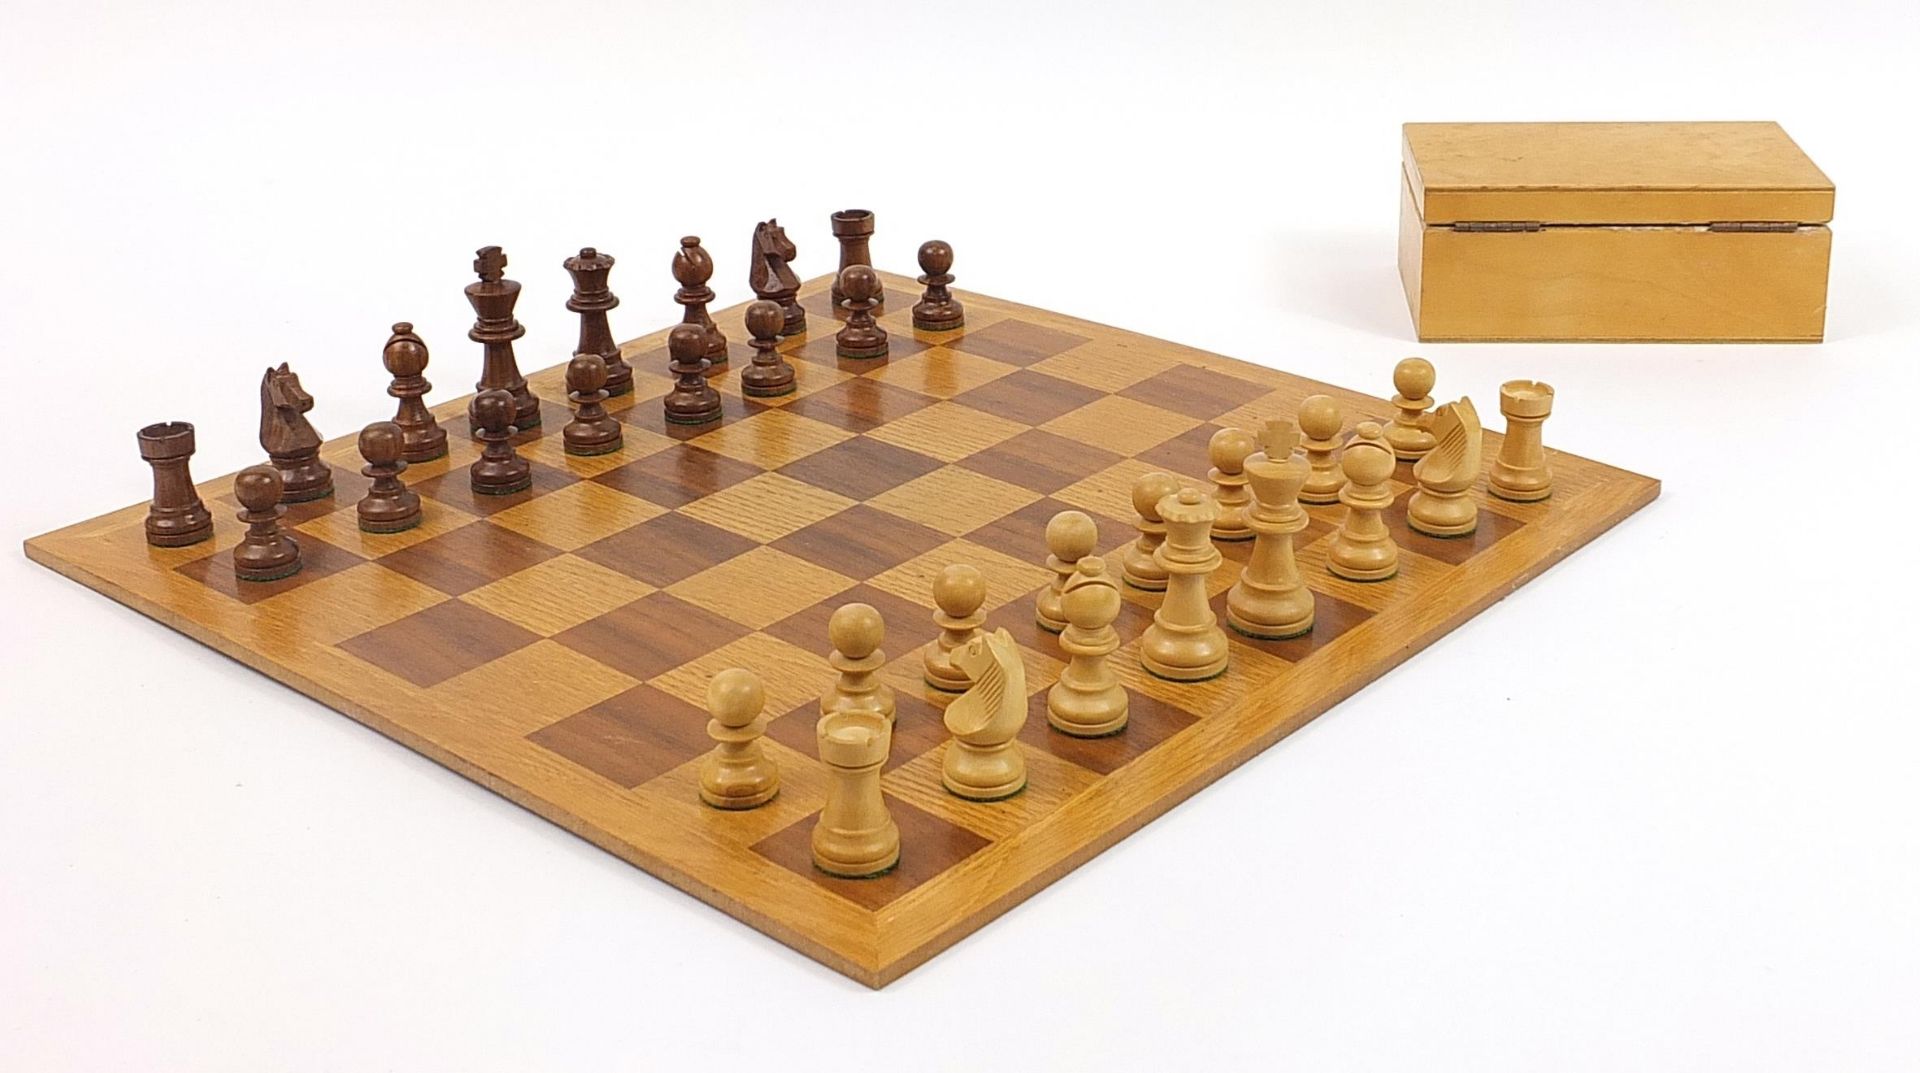 Staunton turned wood chess set with board, the largest pieces 7.5cm high, the board 44.5cm x 44.5cm - Image 2 of 3